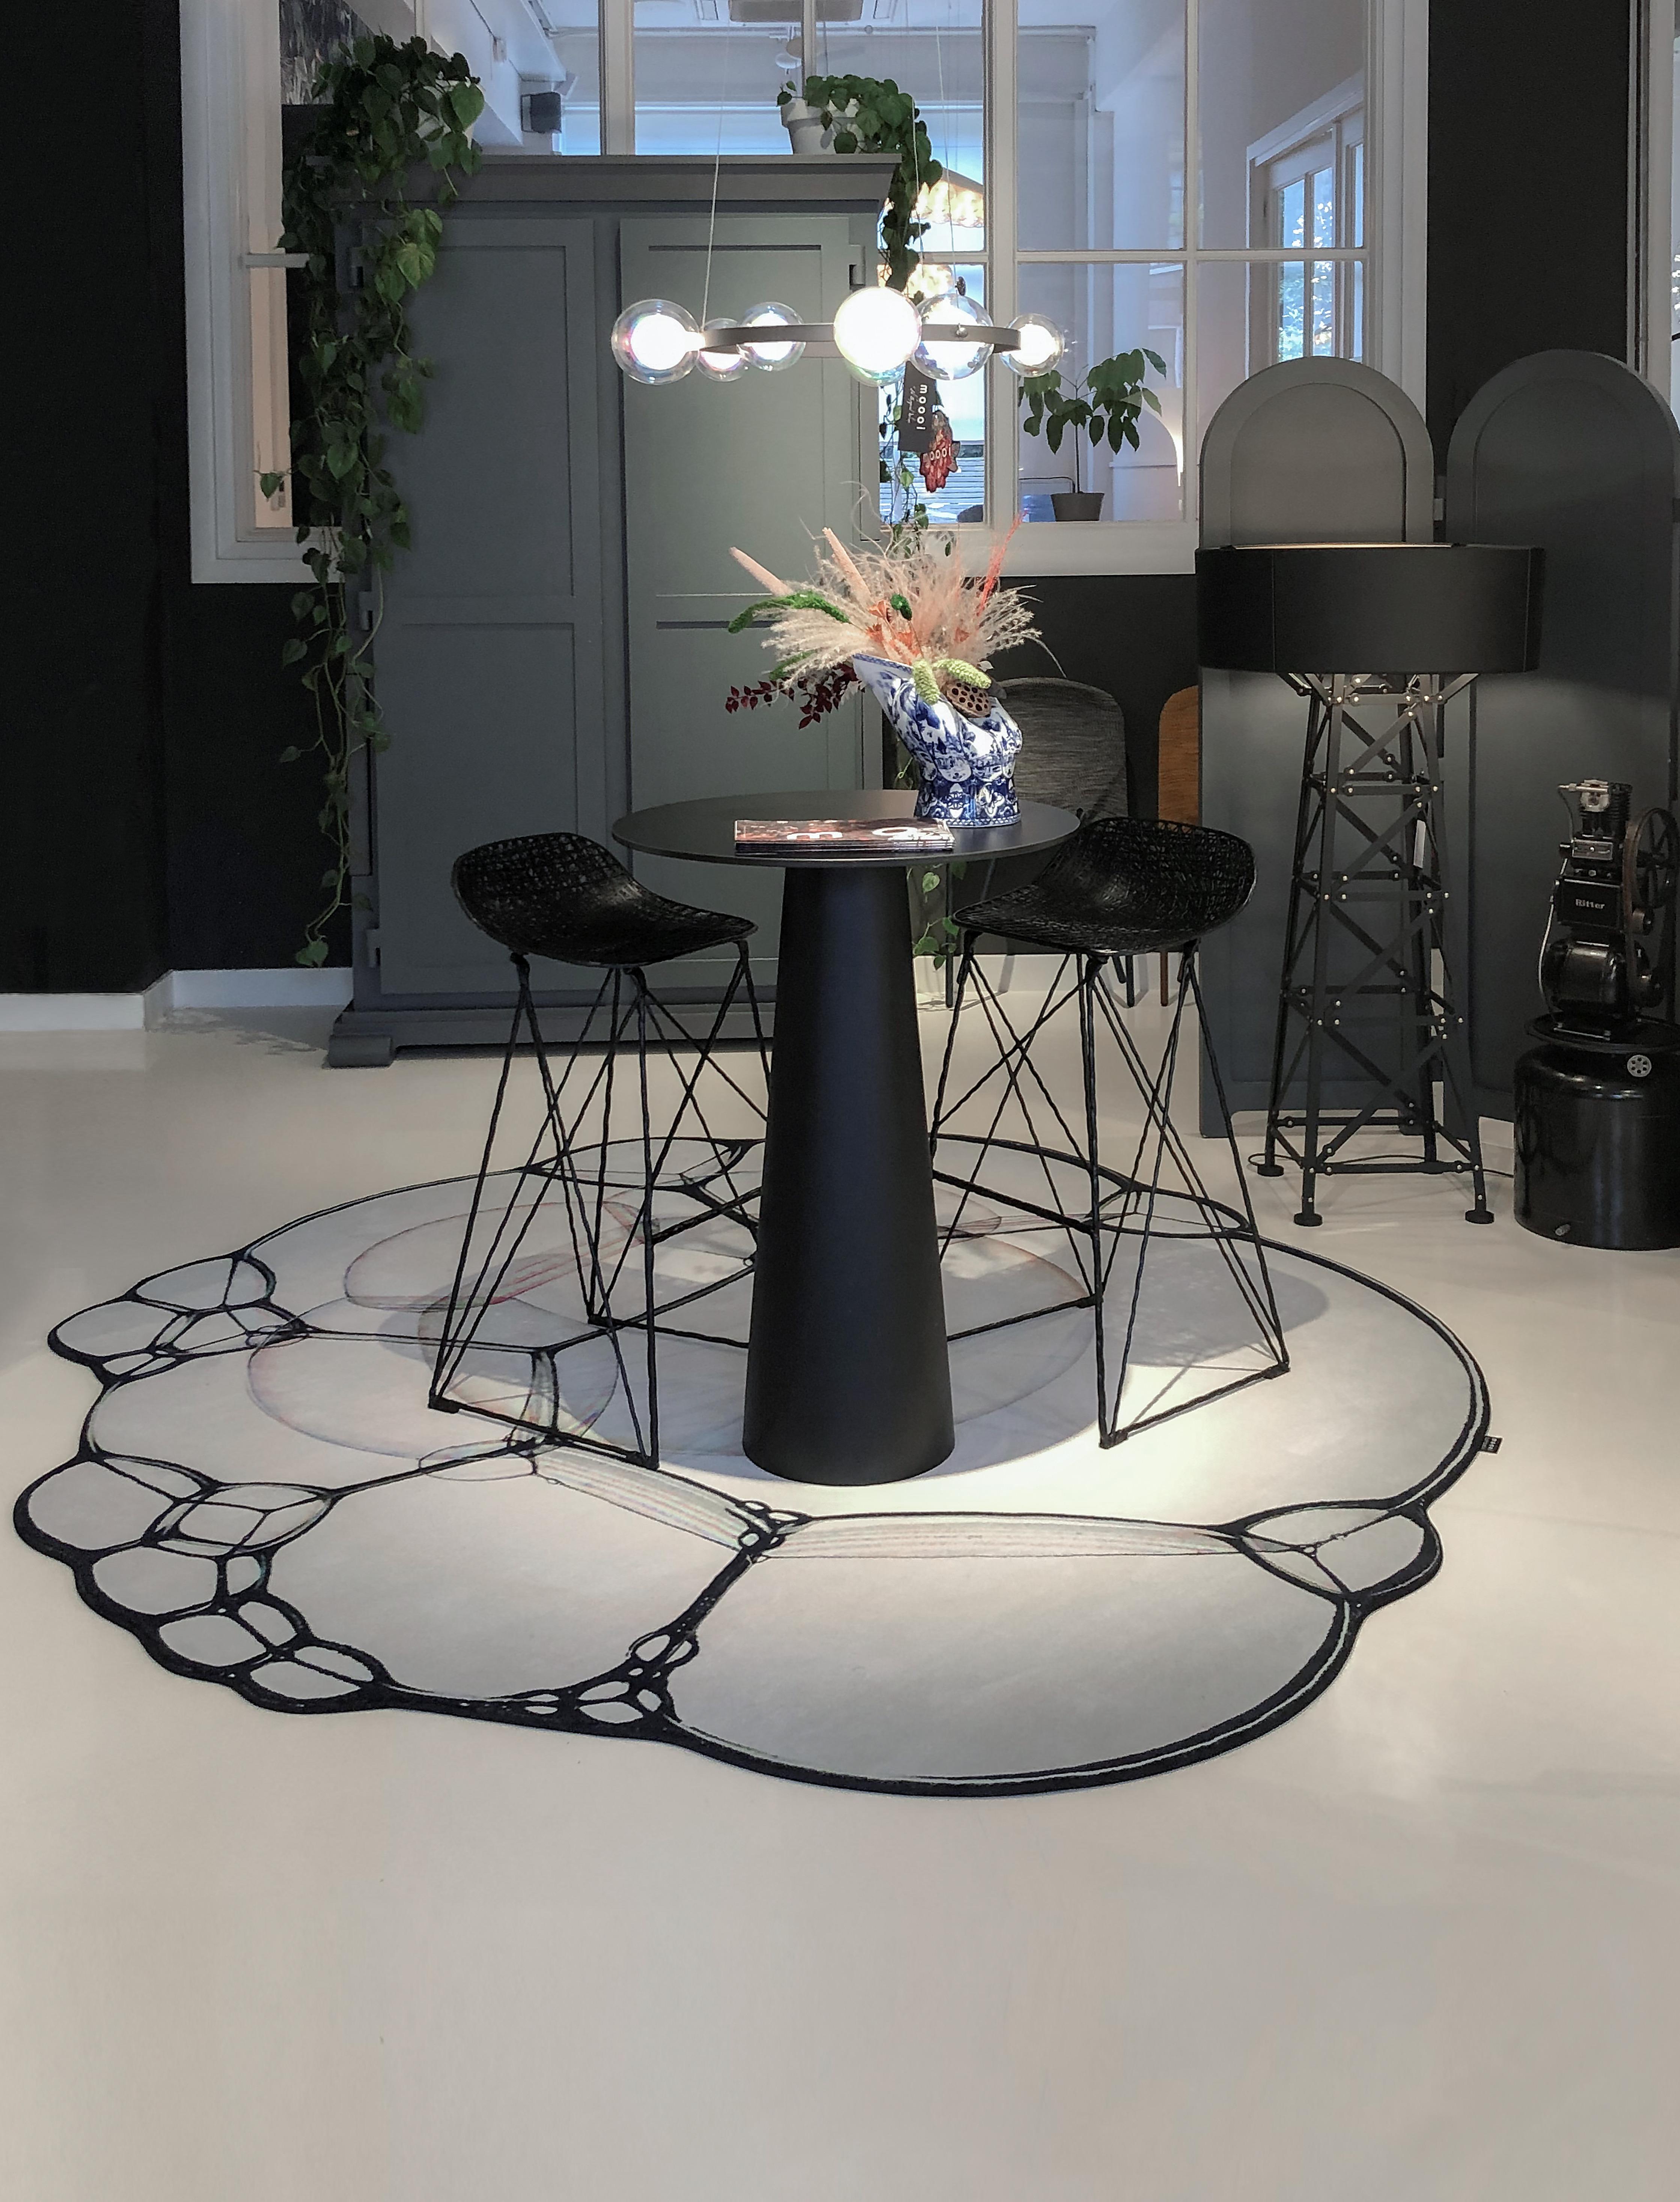 Moooi Large Bubble Oil Zoom rug in Soft Yarn Polyamide by Sjoerd Vroonland

Sjoerd Vroonland is a master of revised crafts and a remarkable furniture designer. Best known for his “extension chair” that became an instant icon of the Dutch Design